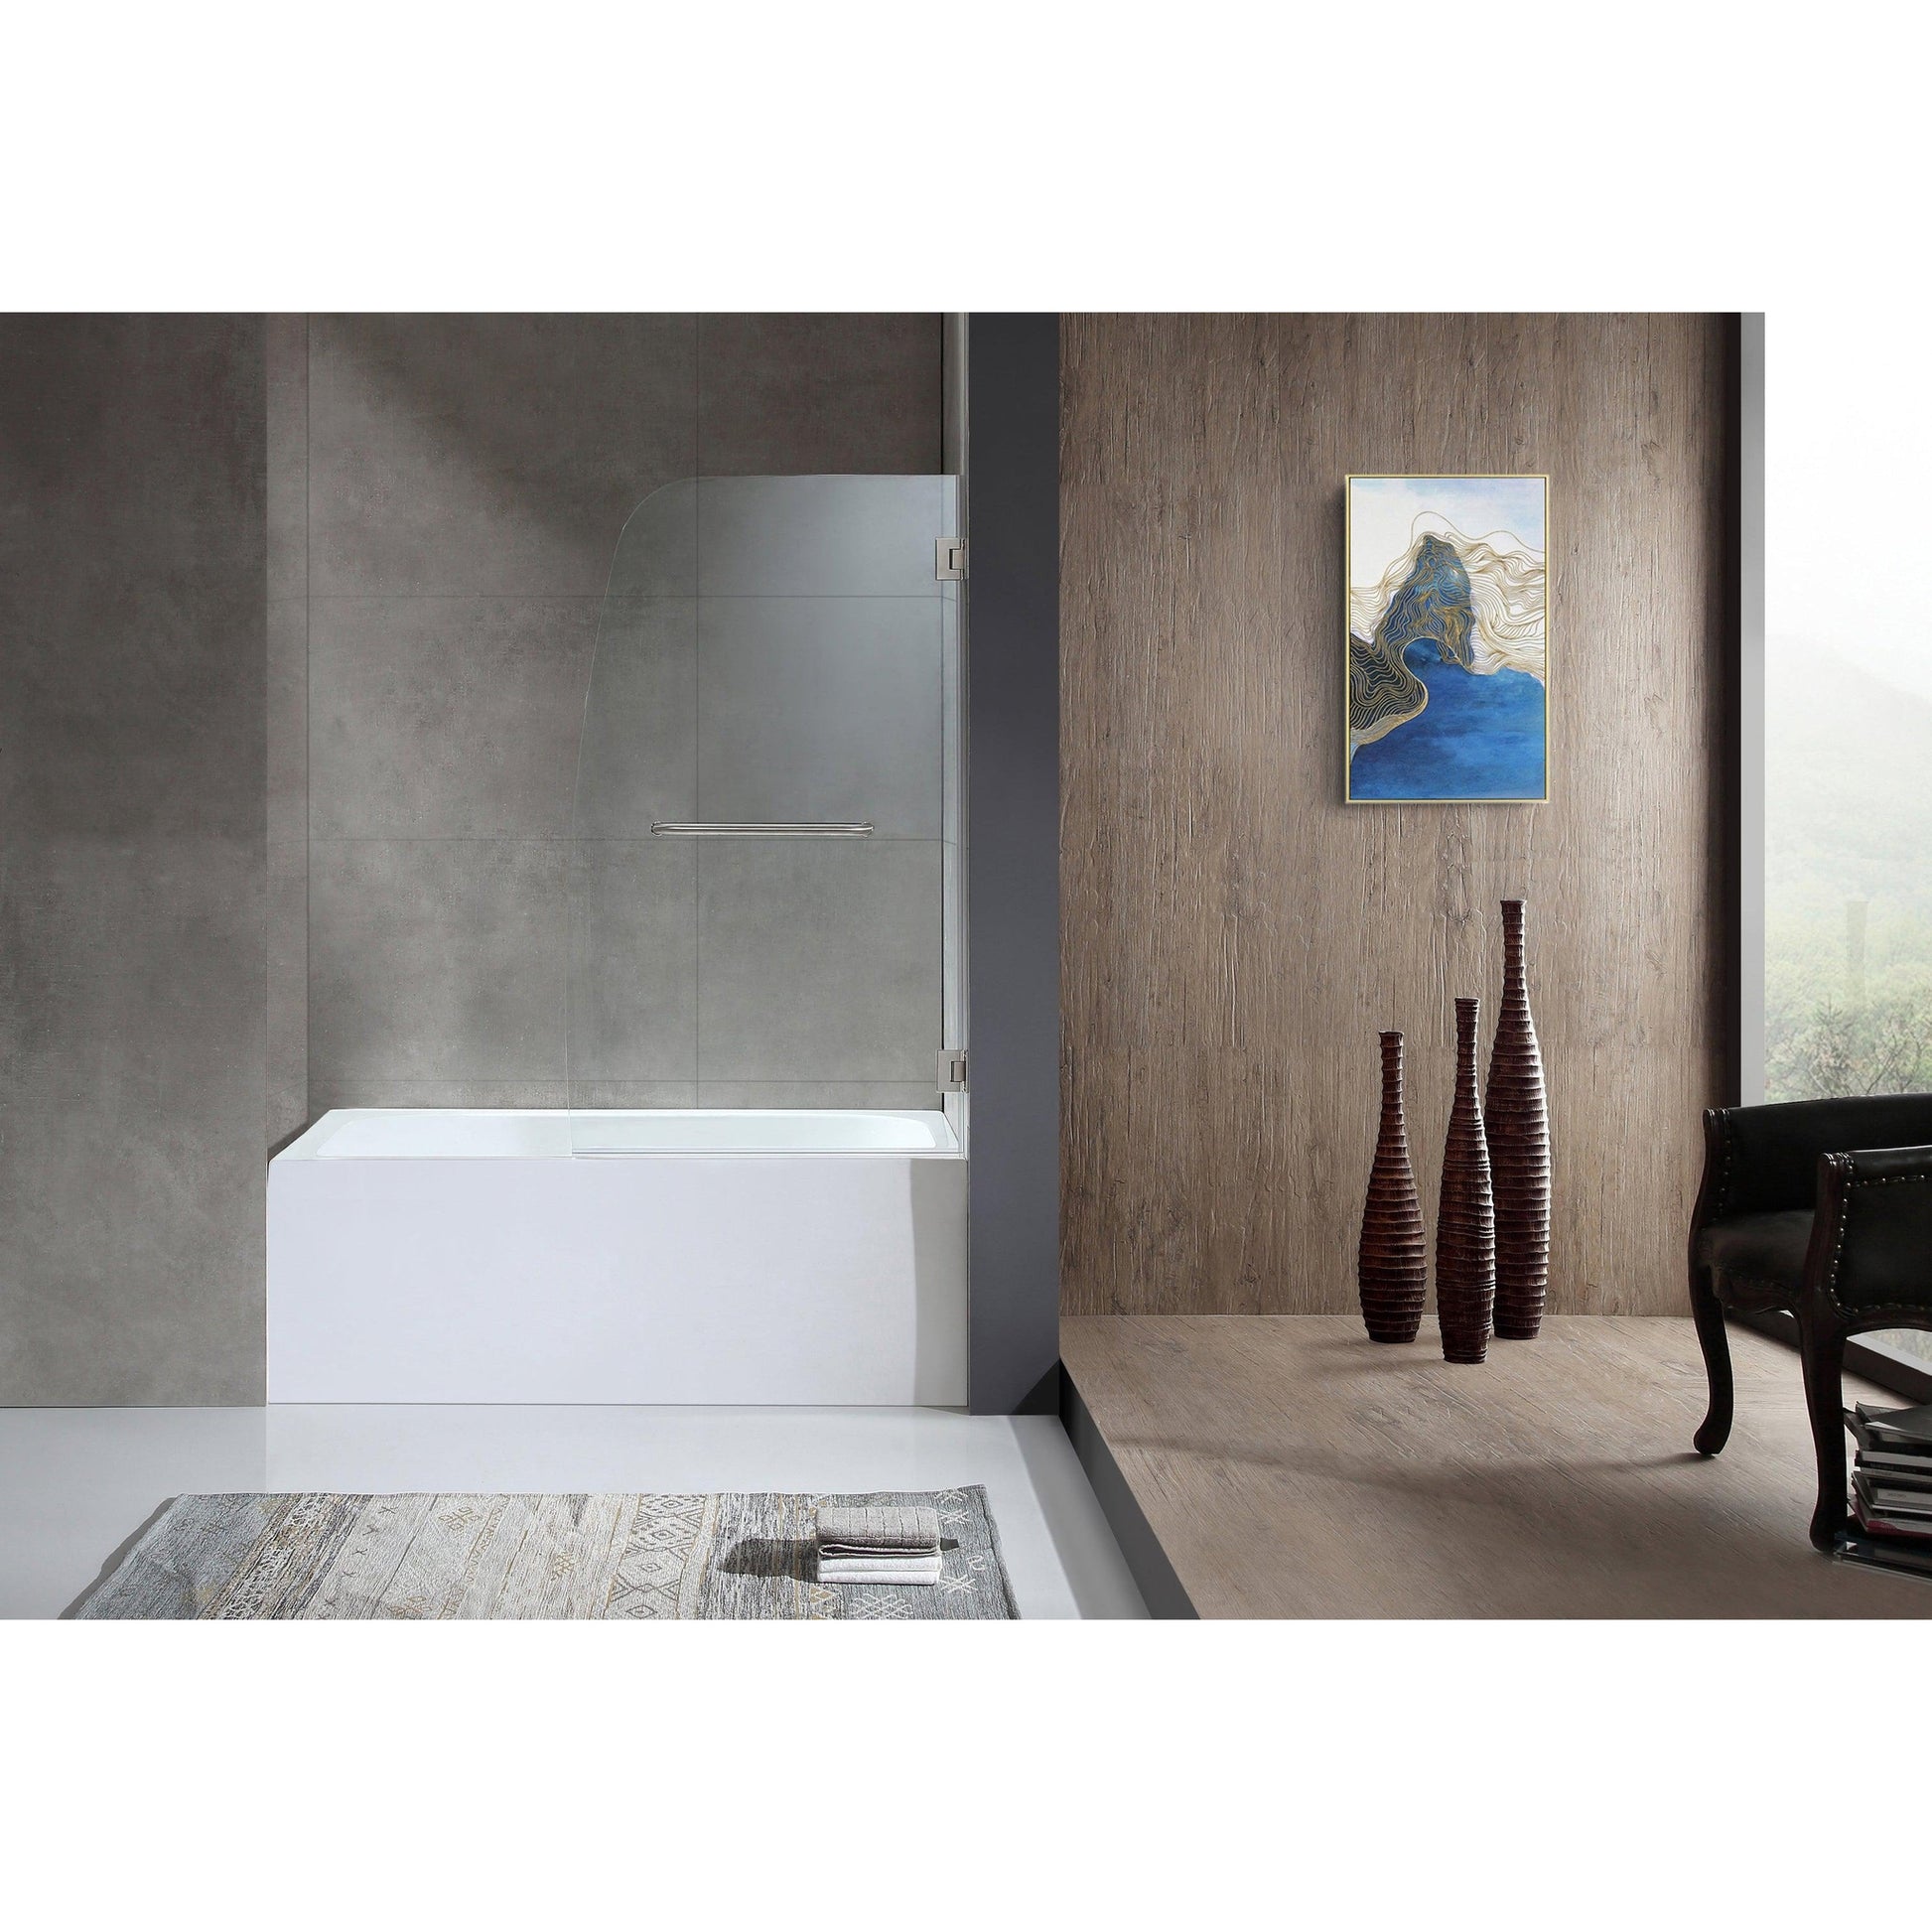 ANZZI Grand Series White "60 x 30" Alcove Right Drain Rectangular Bathtub With Built-In Flange and Frameless Brushed Nickel Hinged Door